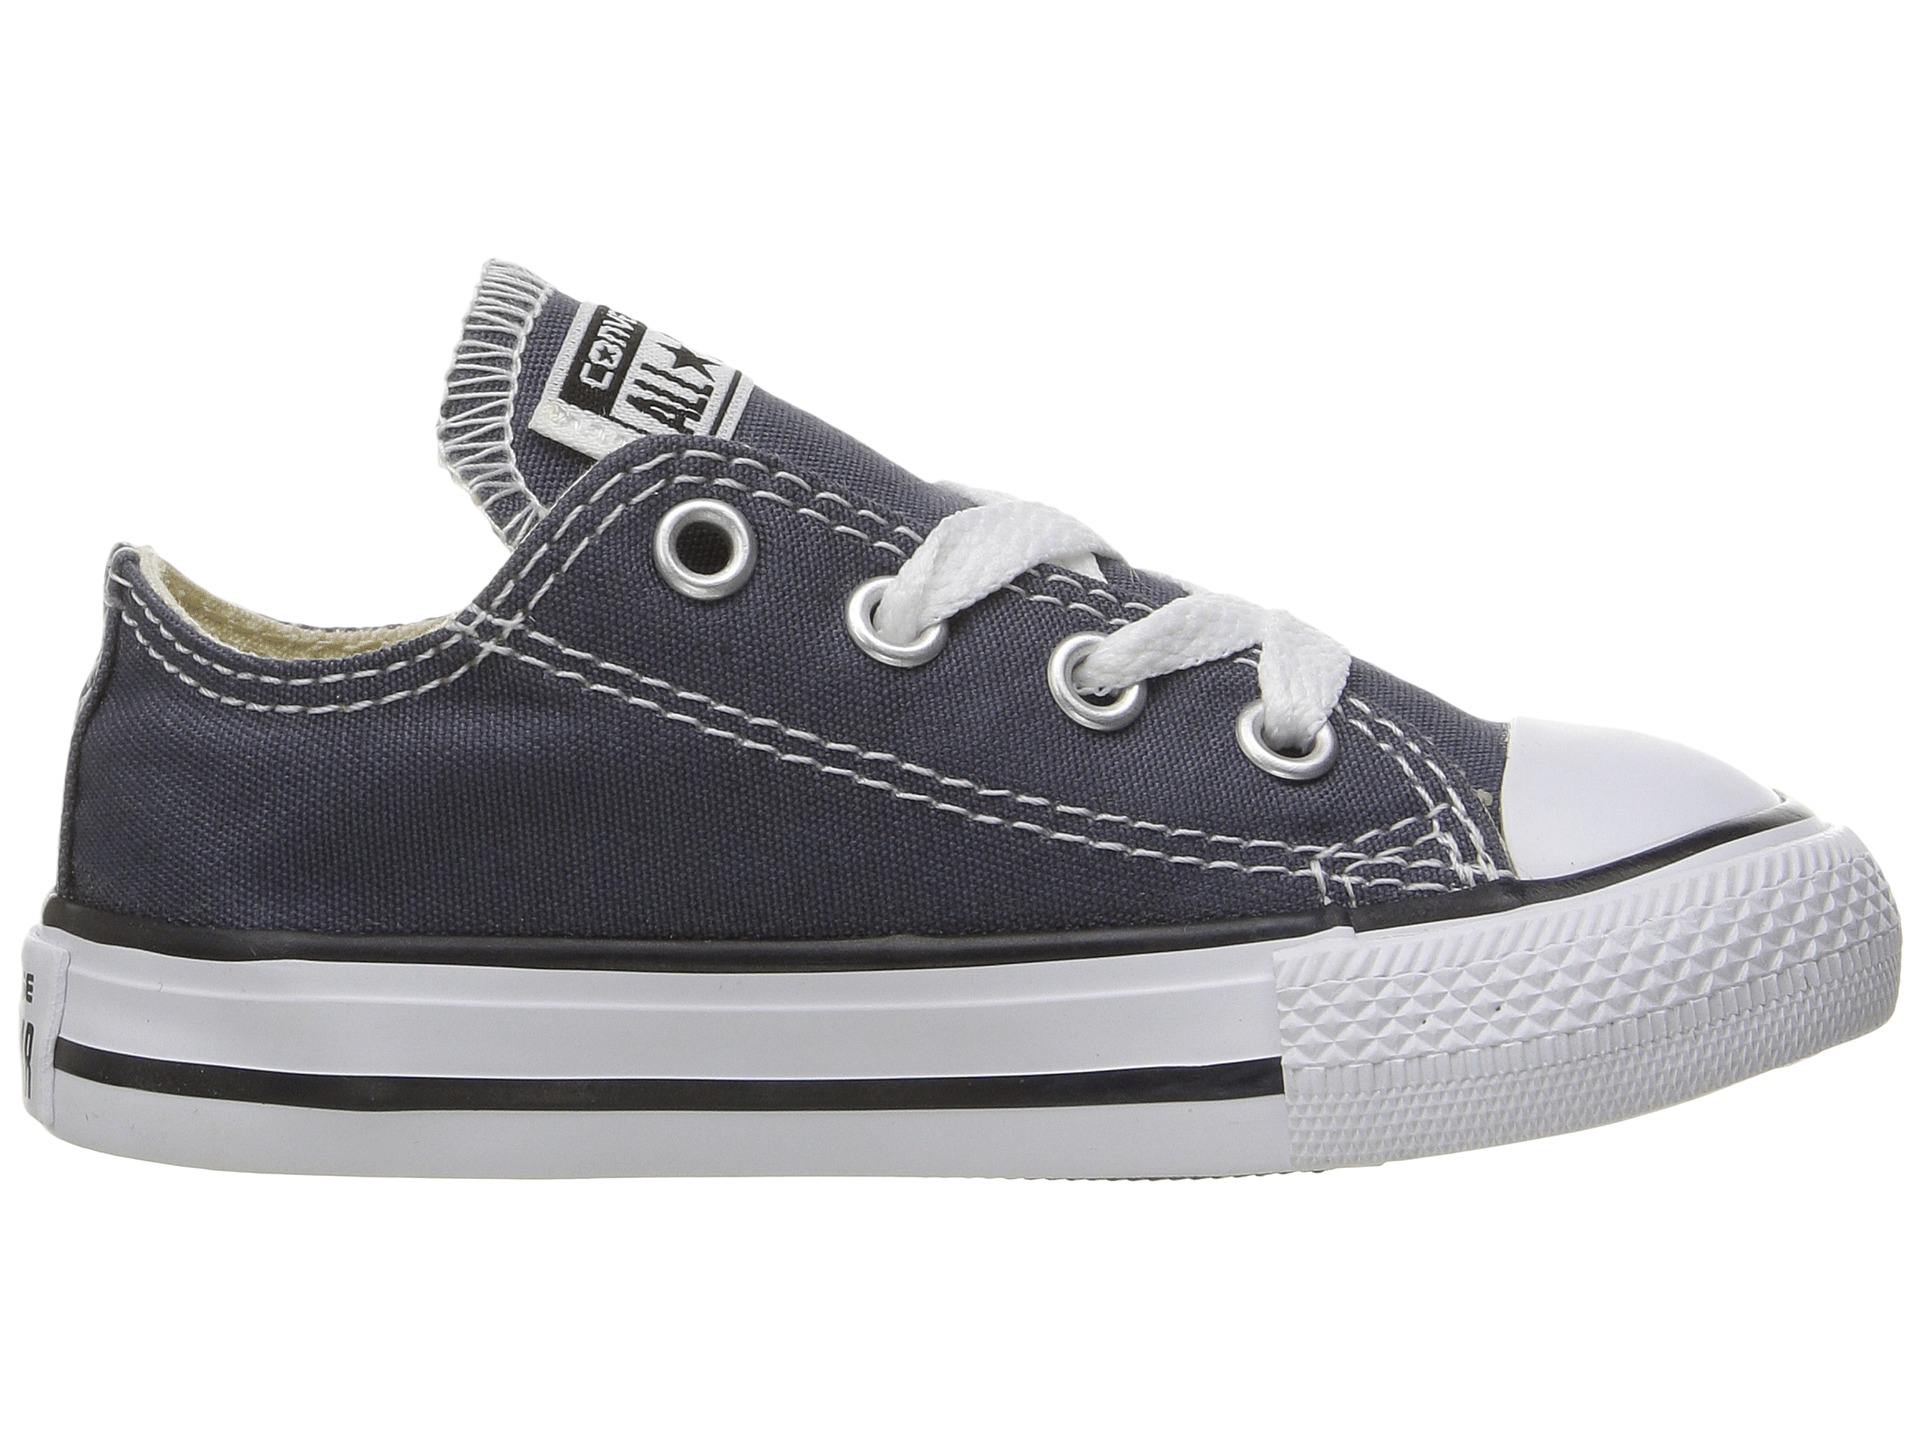 Converse Kids Chuck Taylor All Star Ox (Infant/Toddler) at Zappos.com